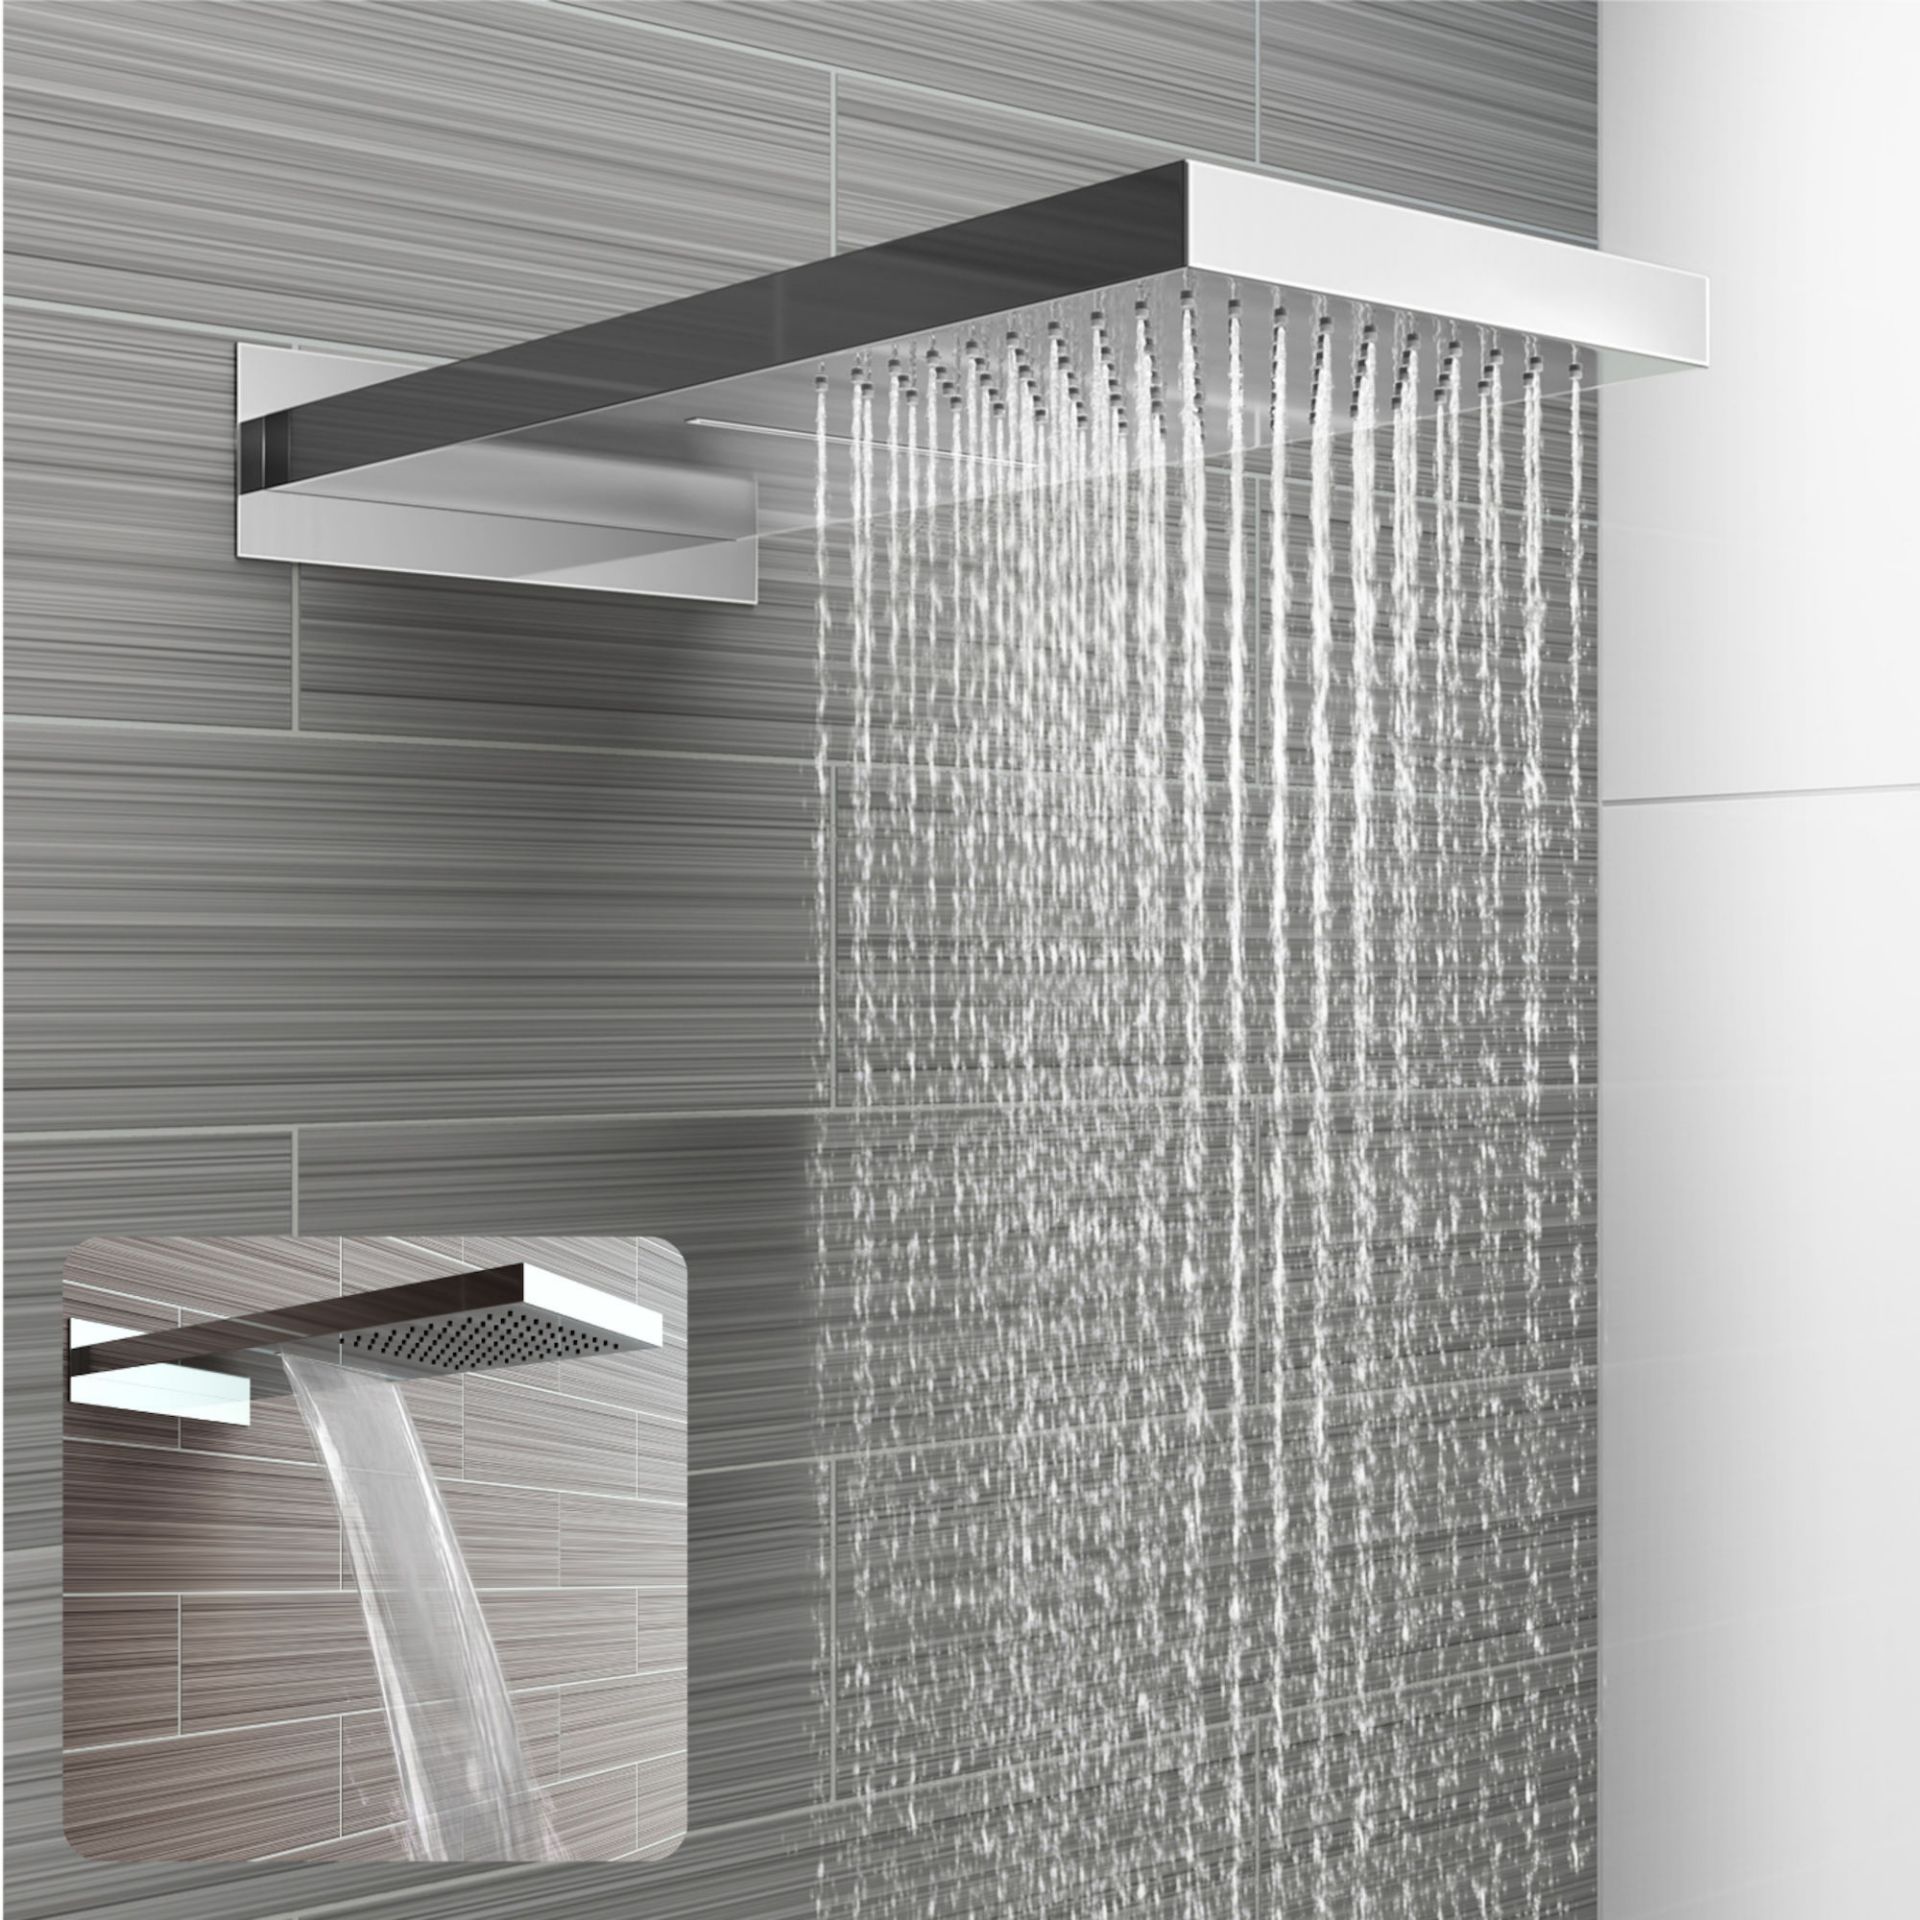 (MW3) Stainless Steel 230x500mm Waterfall Shower Head. RRP £374.99. Dual function waterfall and